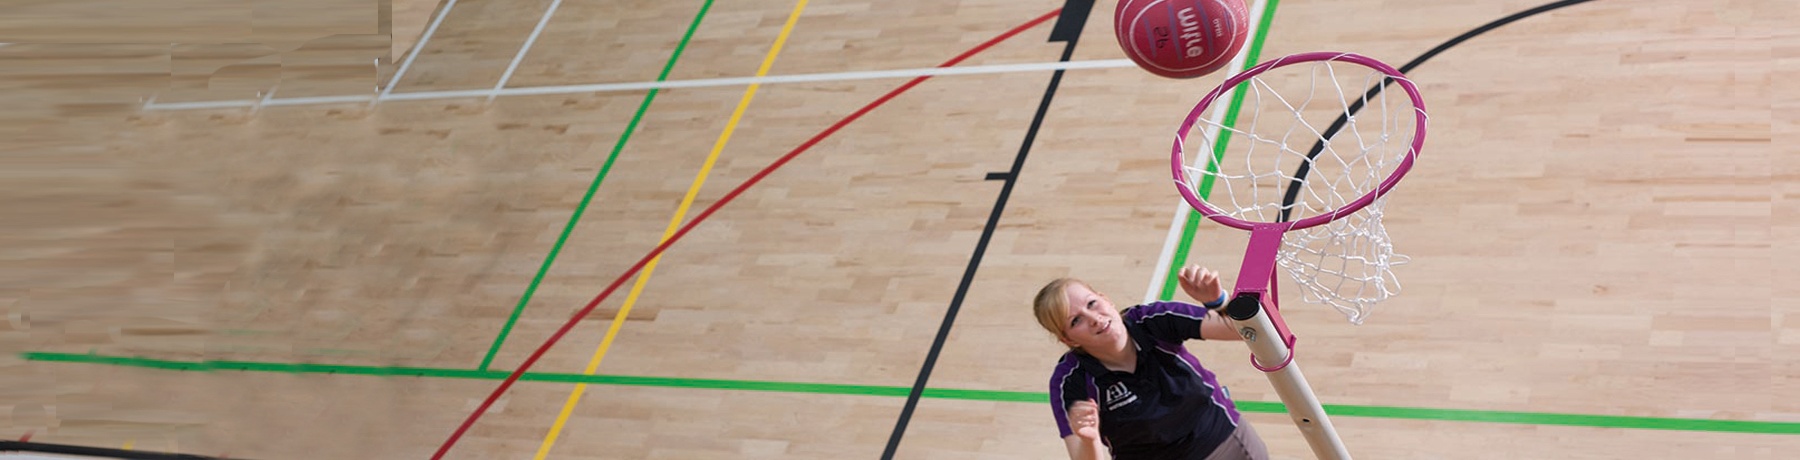 An introduction to walking netball - Rest Less